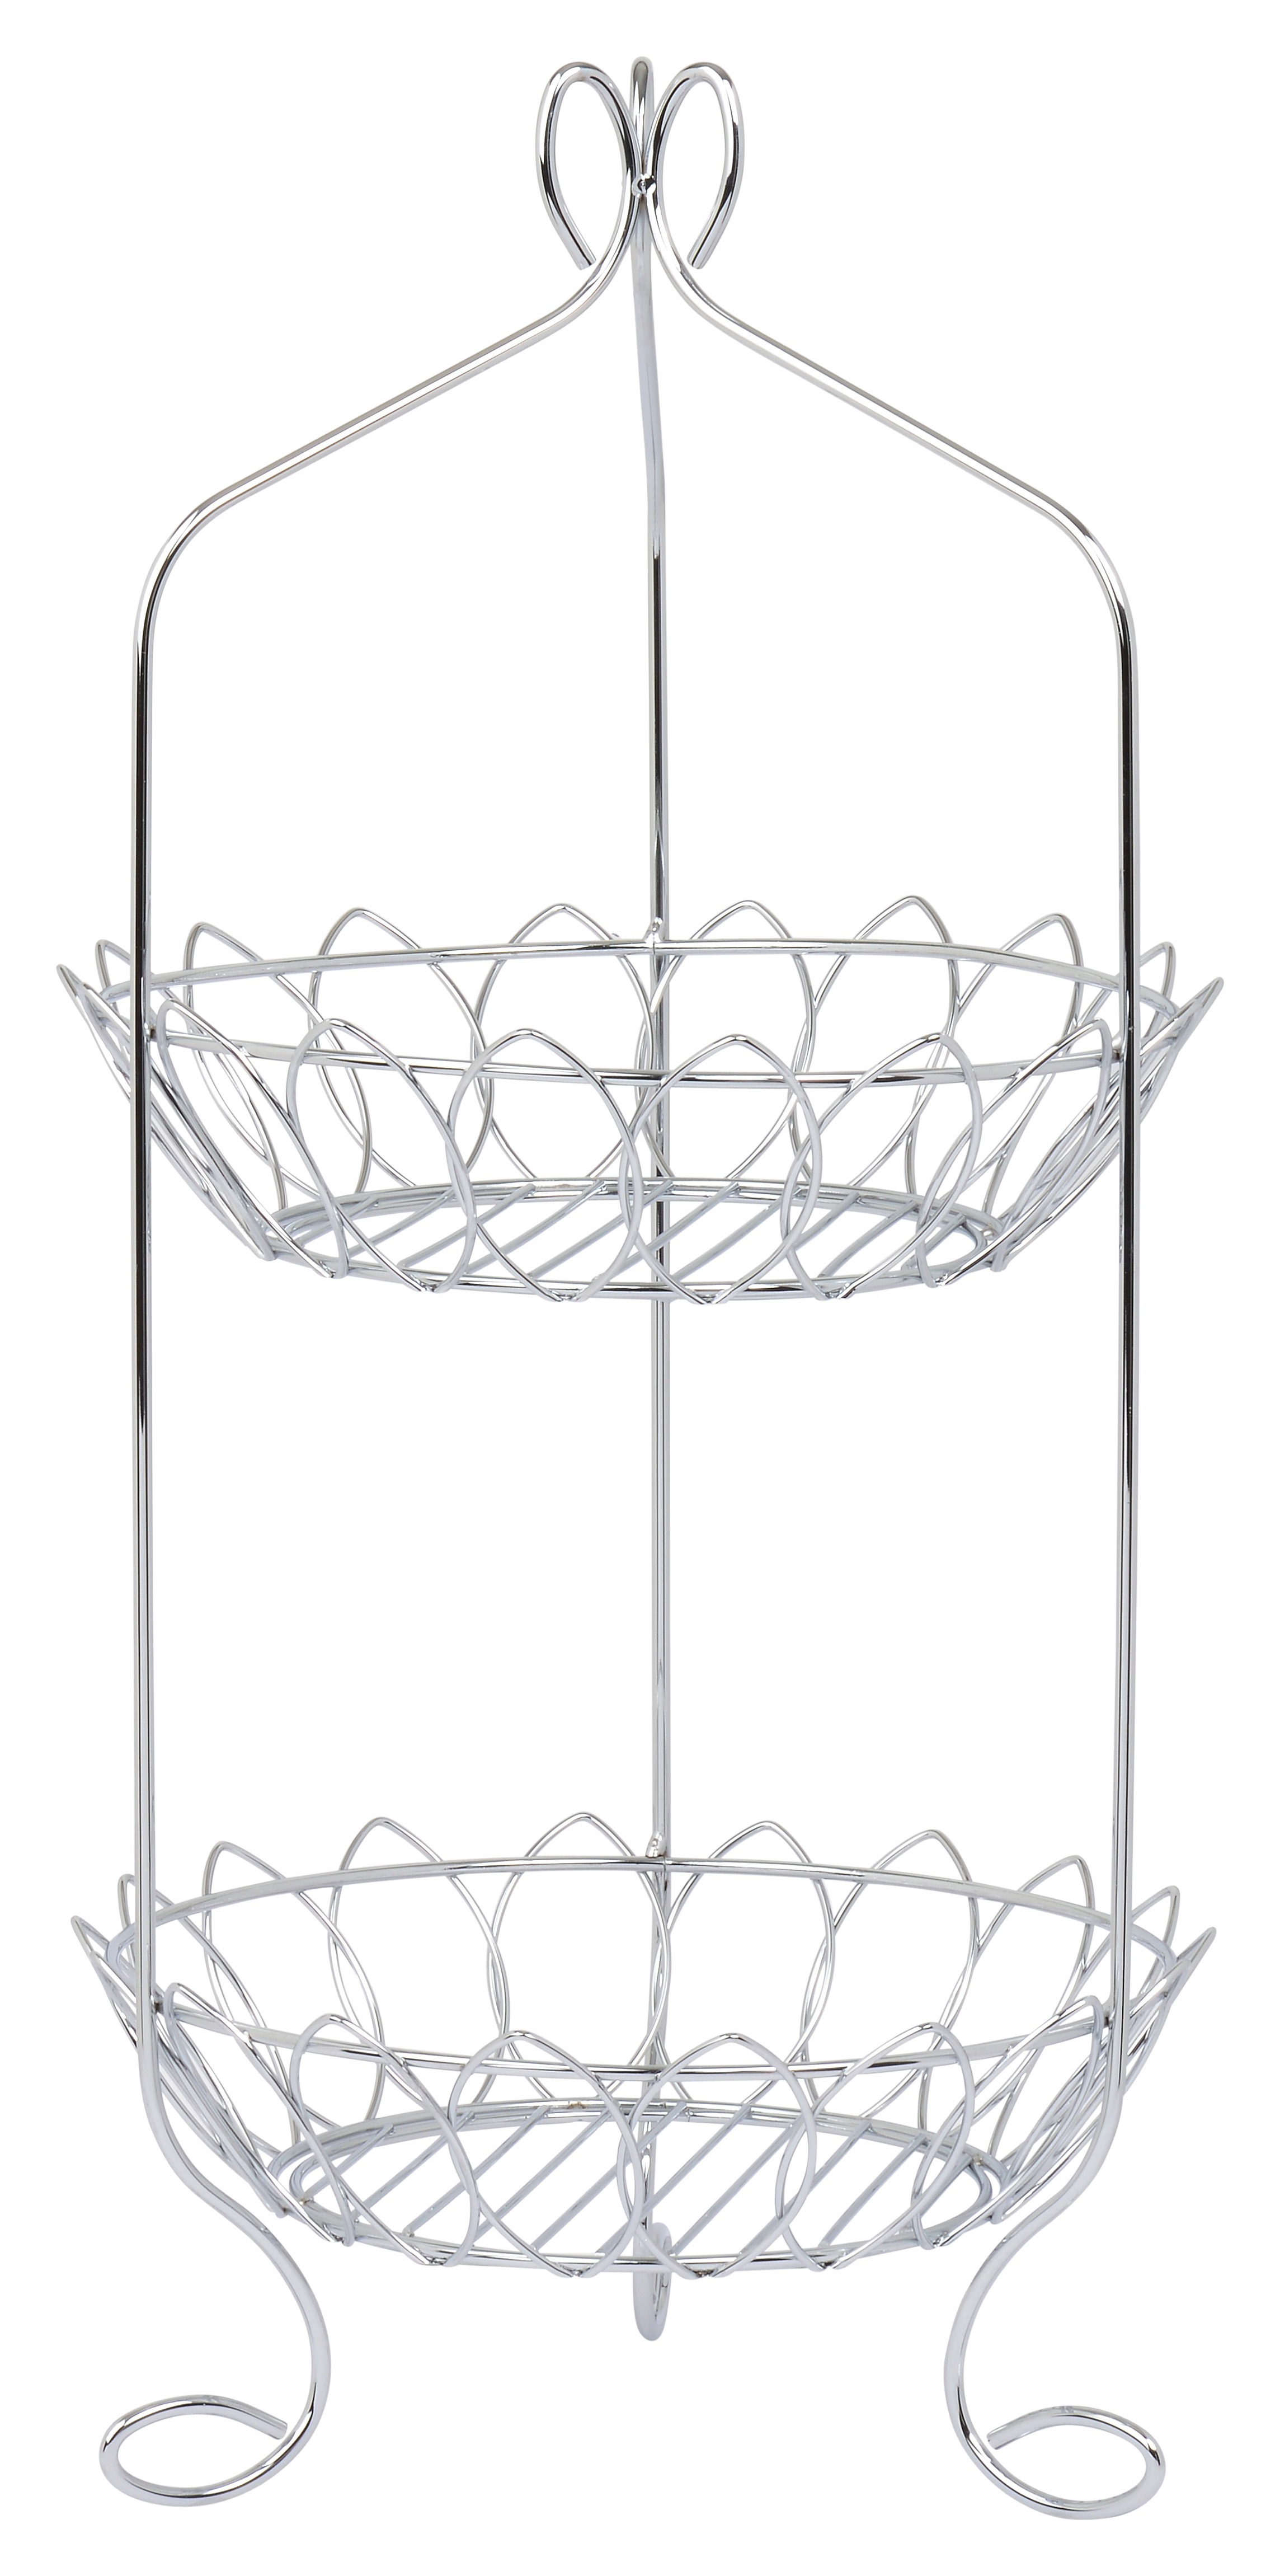 2 Tier Basket - High Quality Stainless Steel with Shiny Chrome Polish